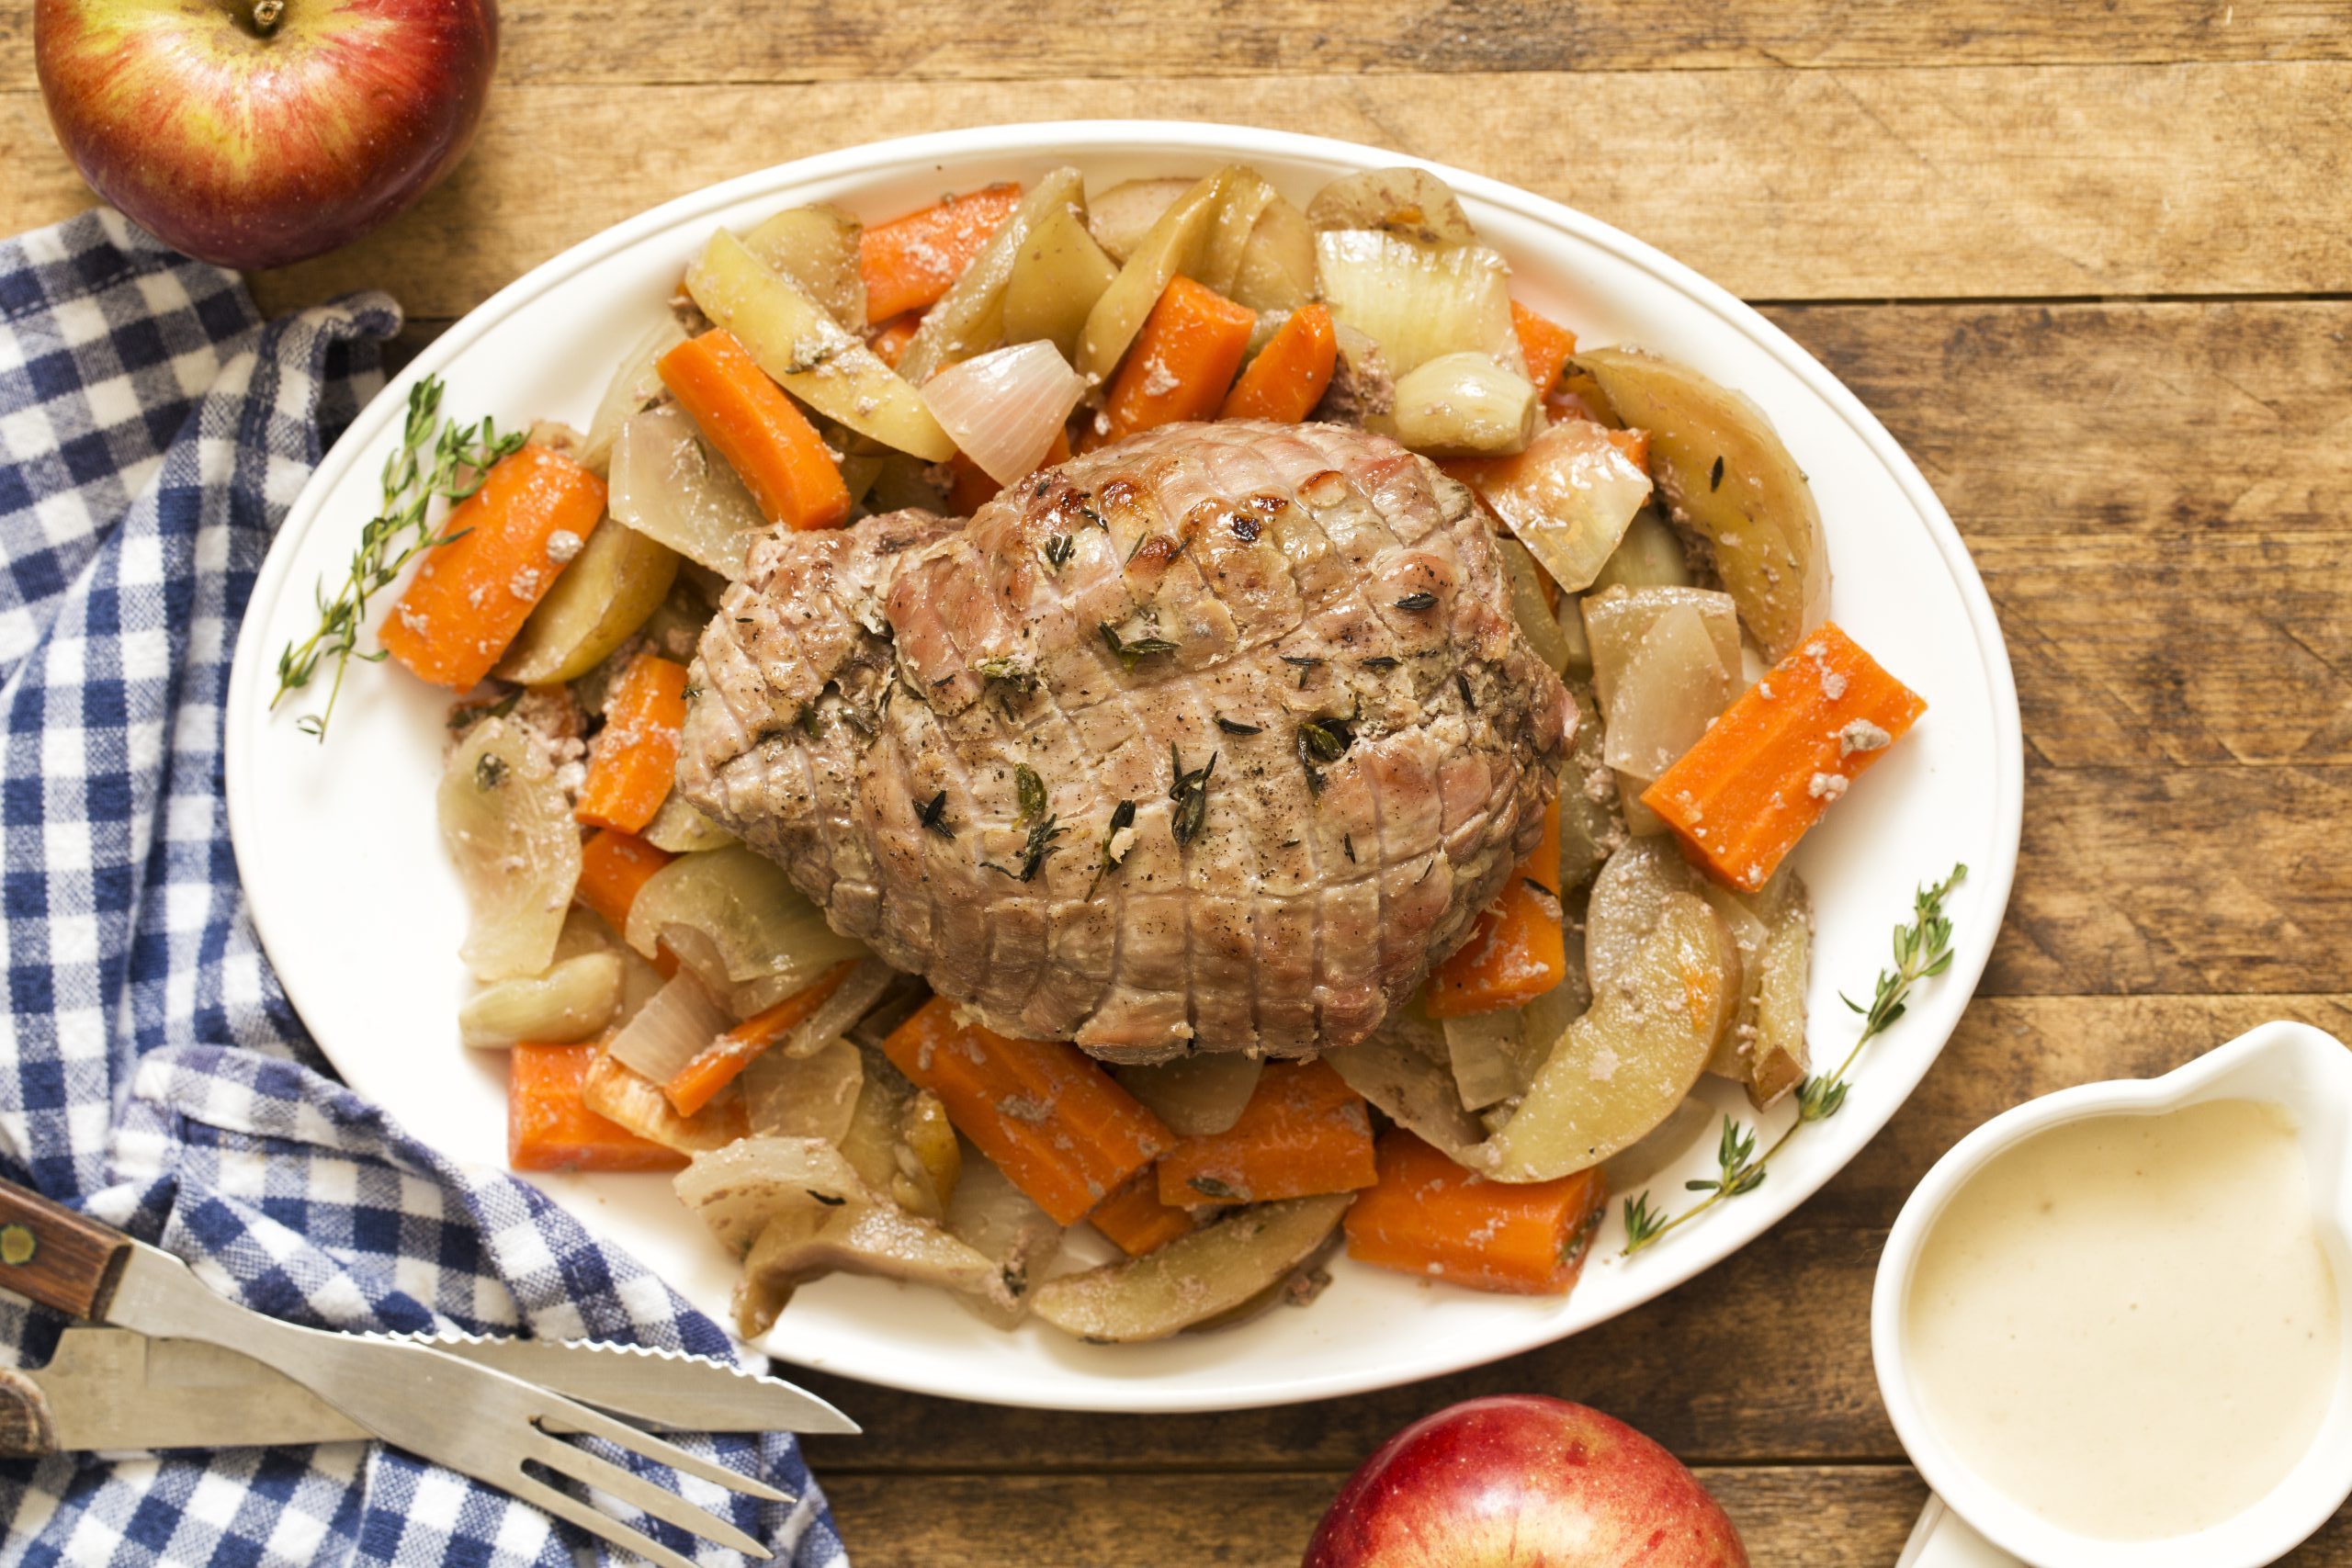 Autumn Veal Roast with Apples, Thyme, and Carrots